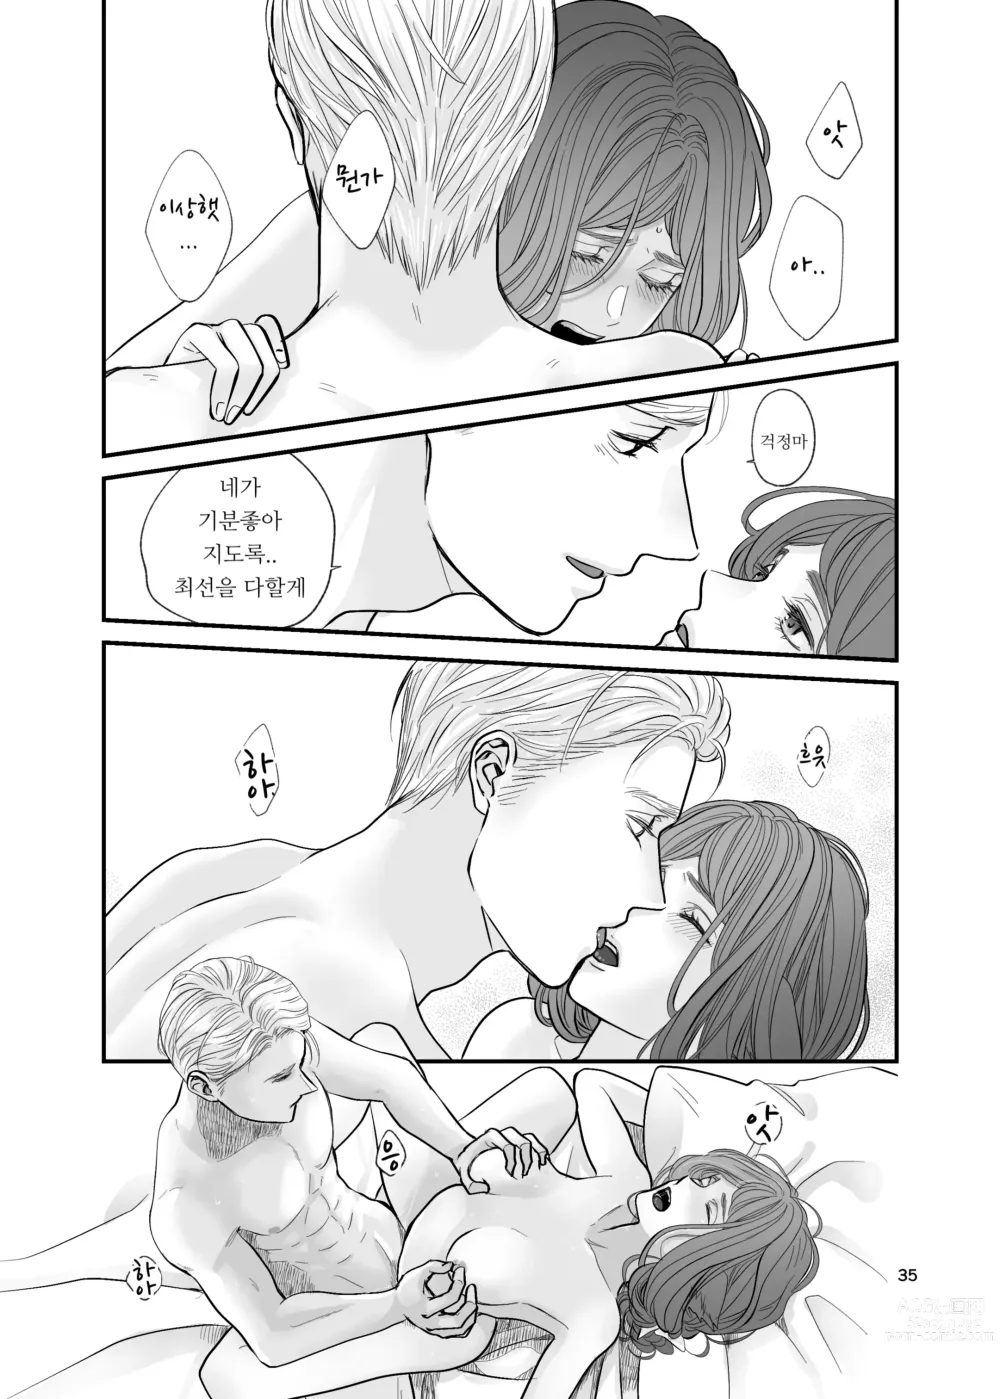 Page 35 of doujinshi 수인 영애와 혼약자